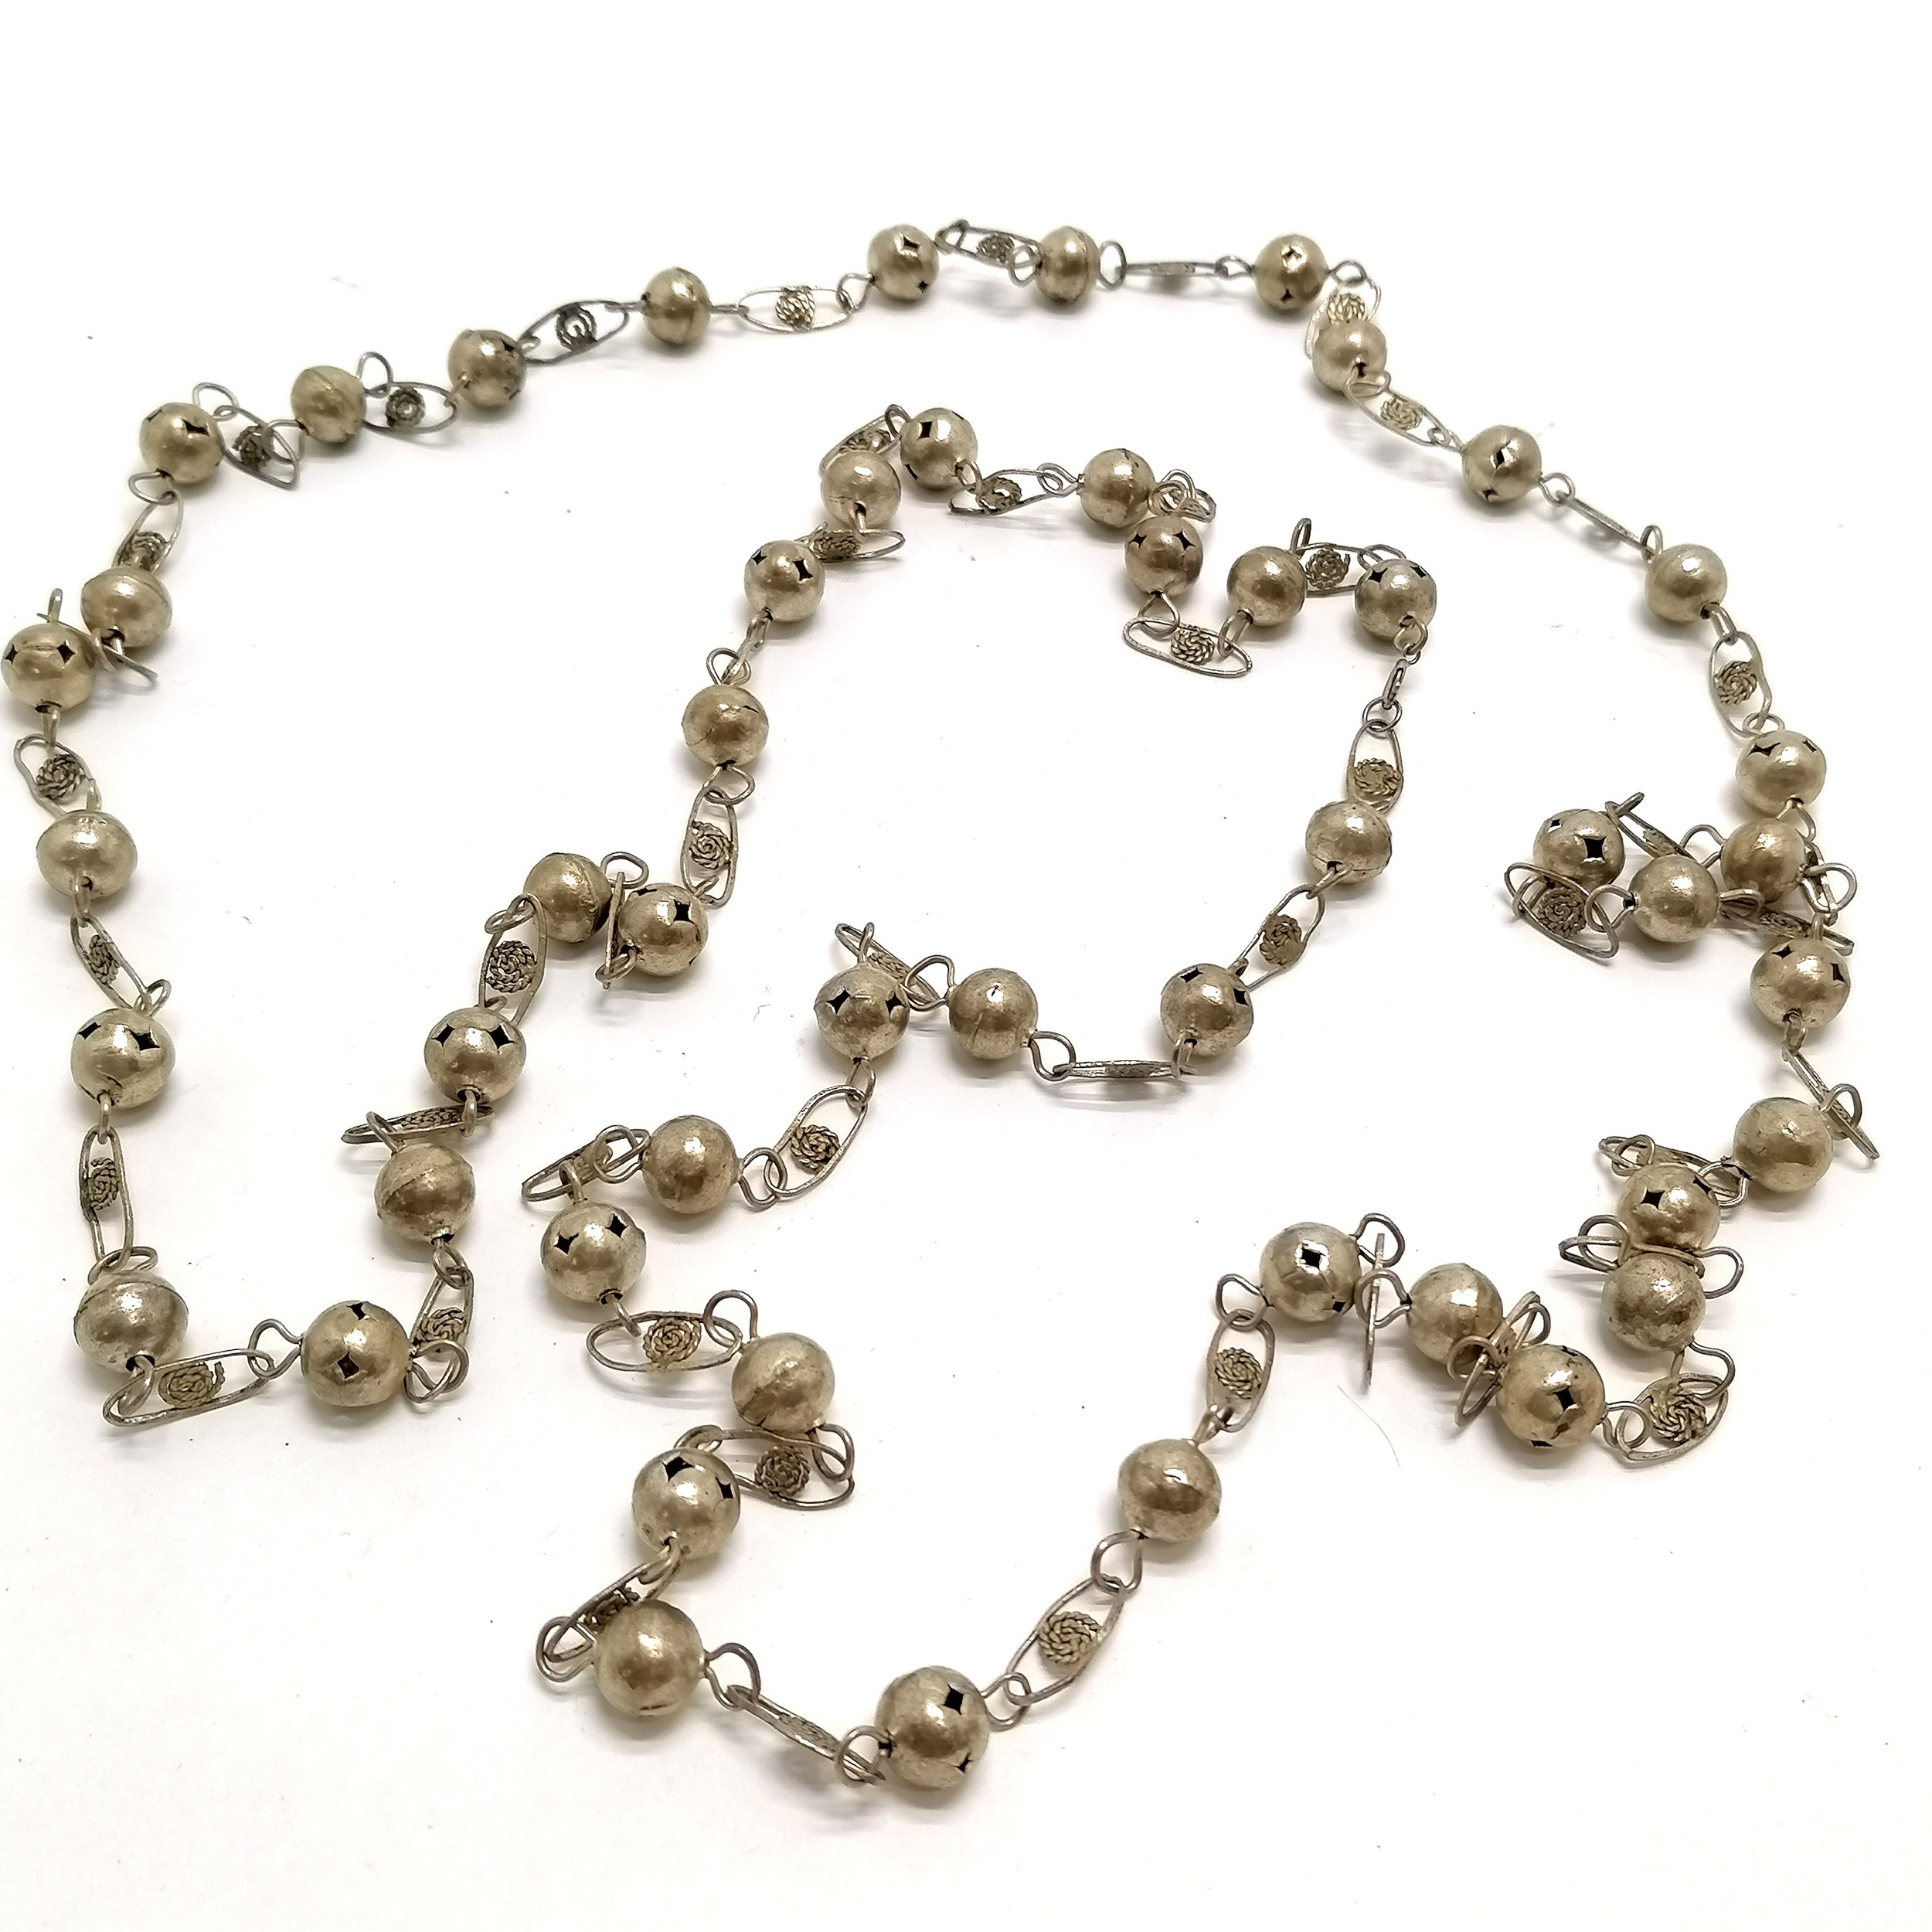 Hand made unmarked silver long chain necklace with bead & panel detail - 180cm & 75g - Image 2 of 2